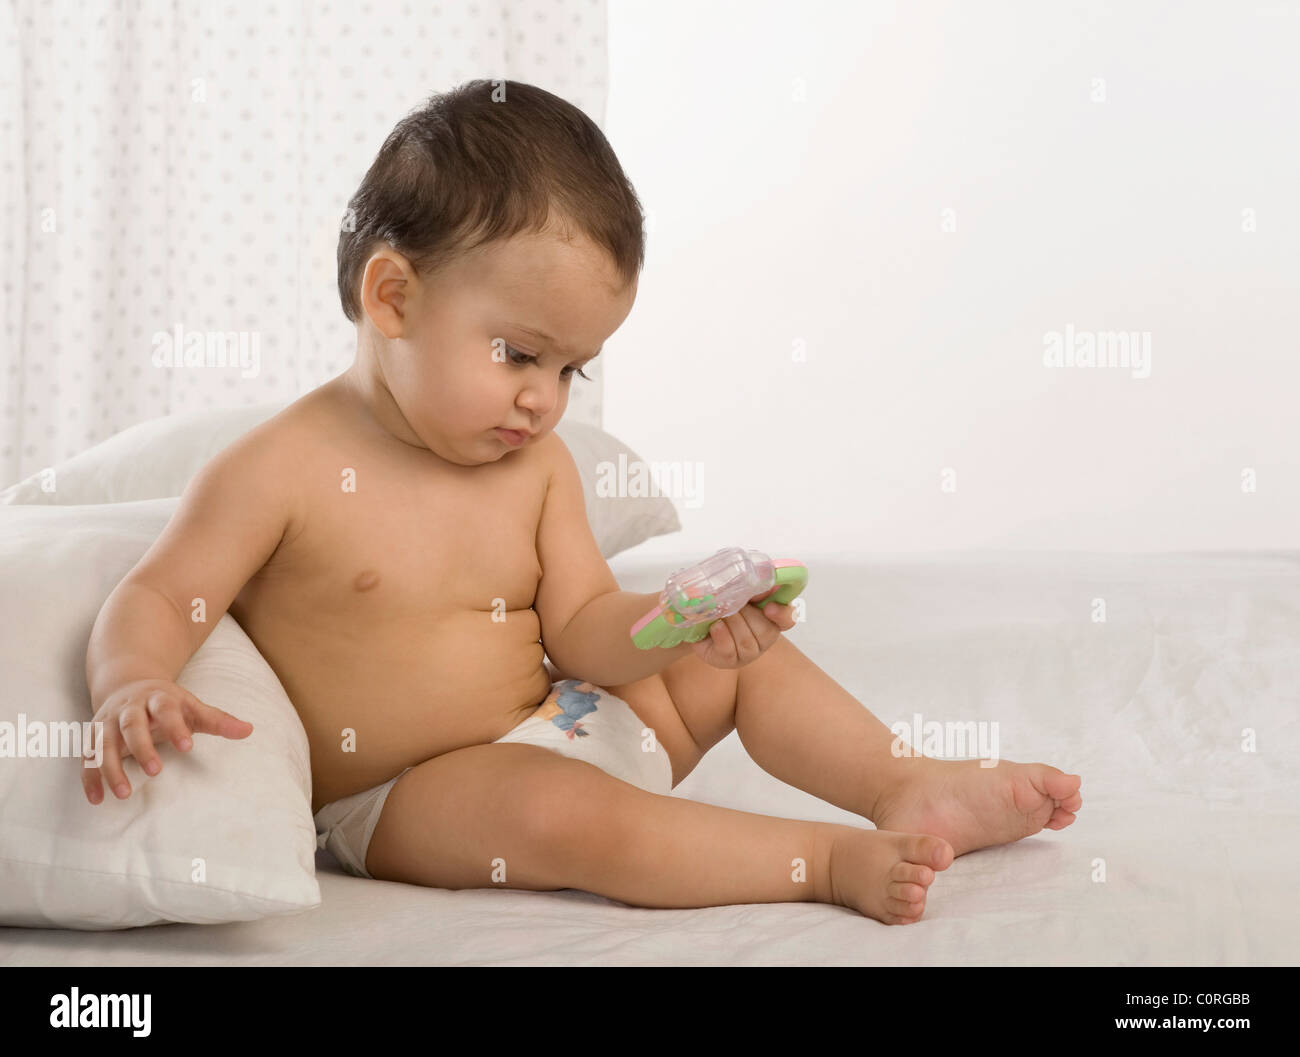 Baby boy playing with a rattle on the bed Stock Photo